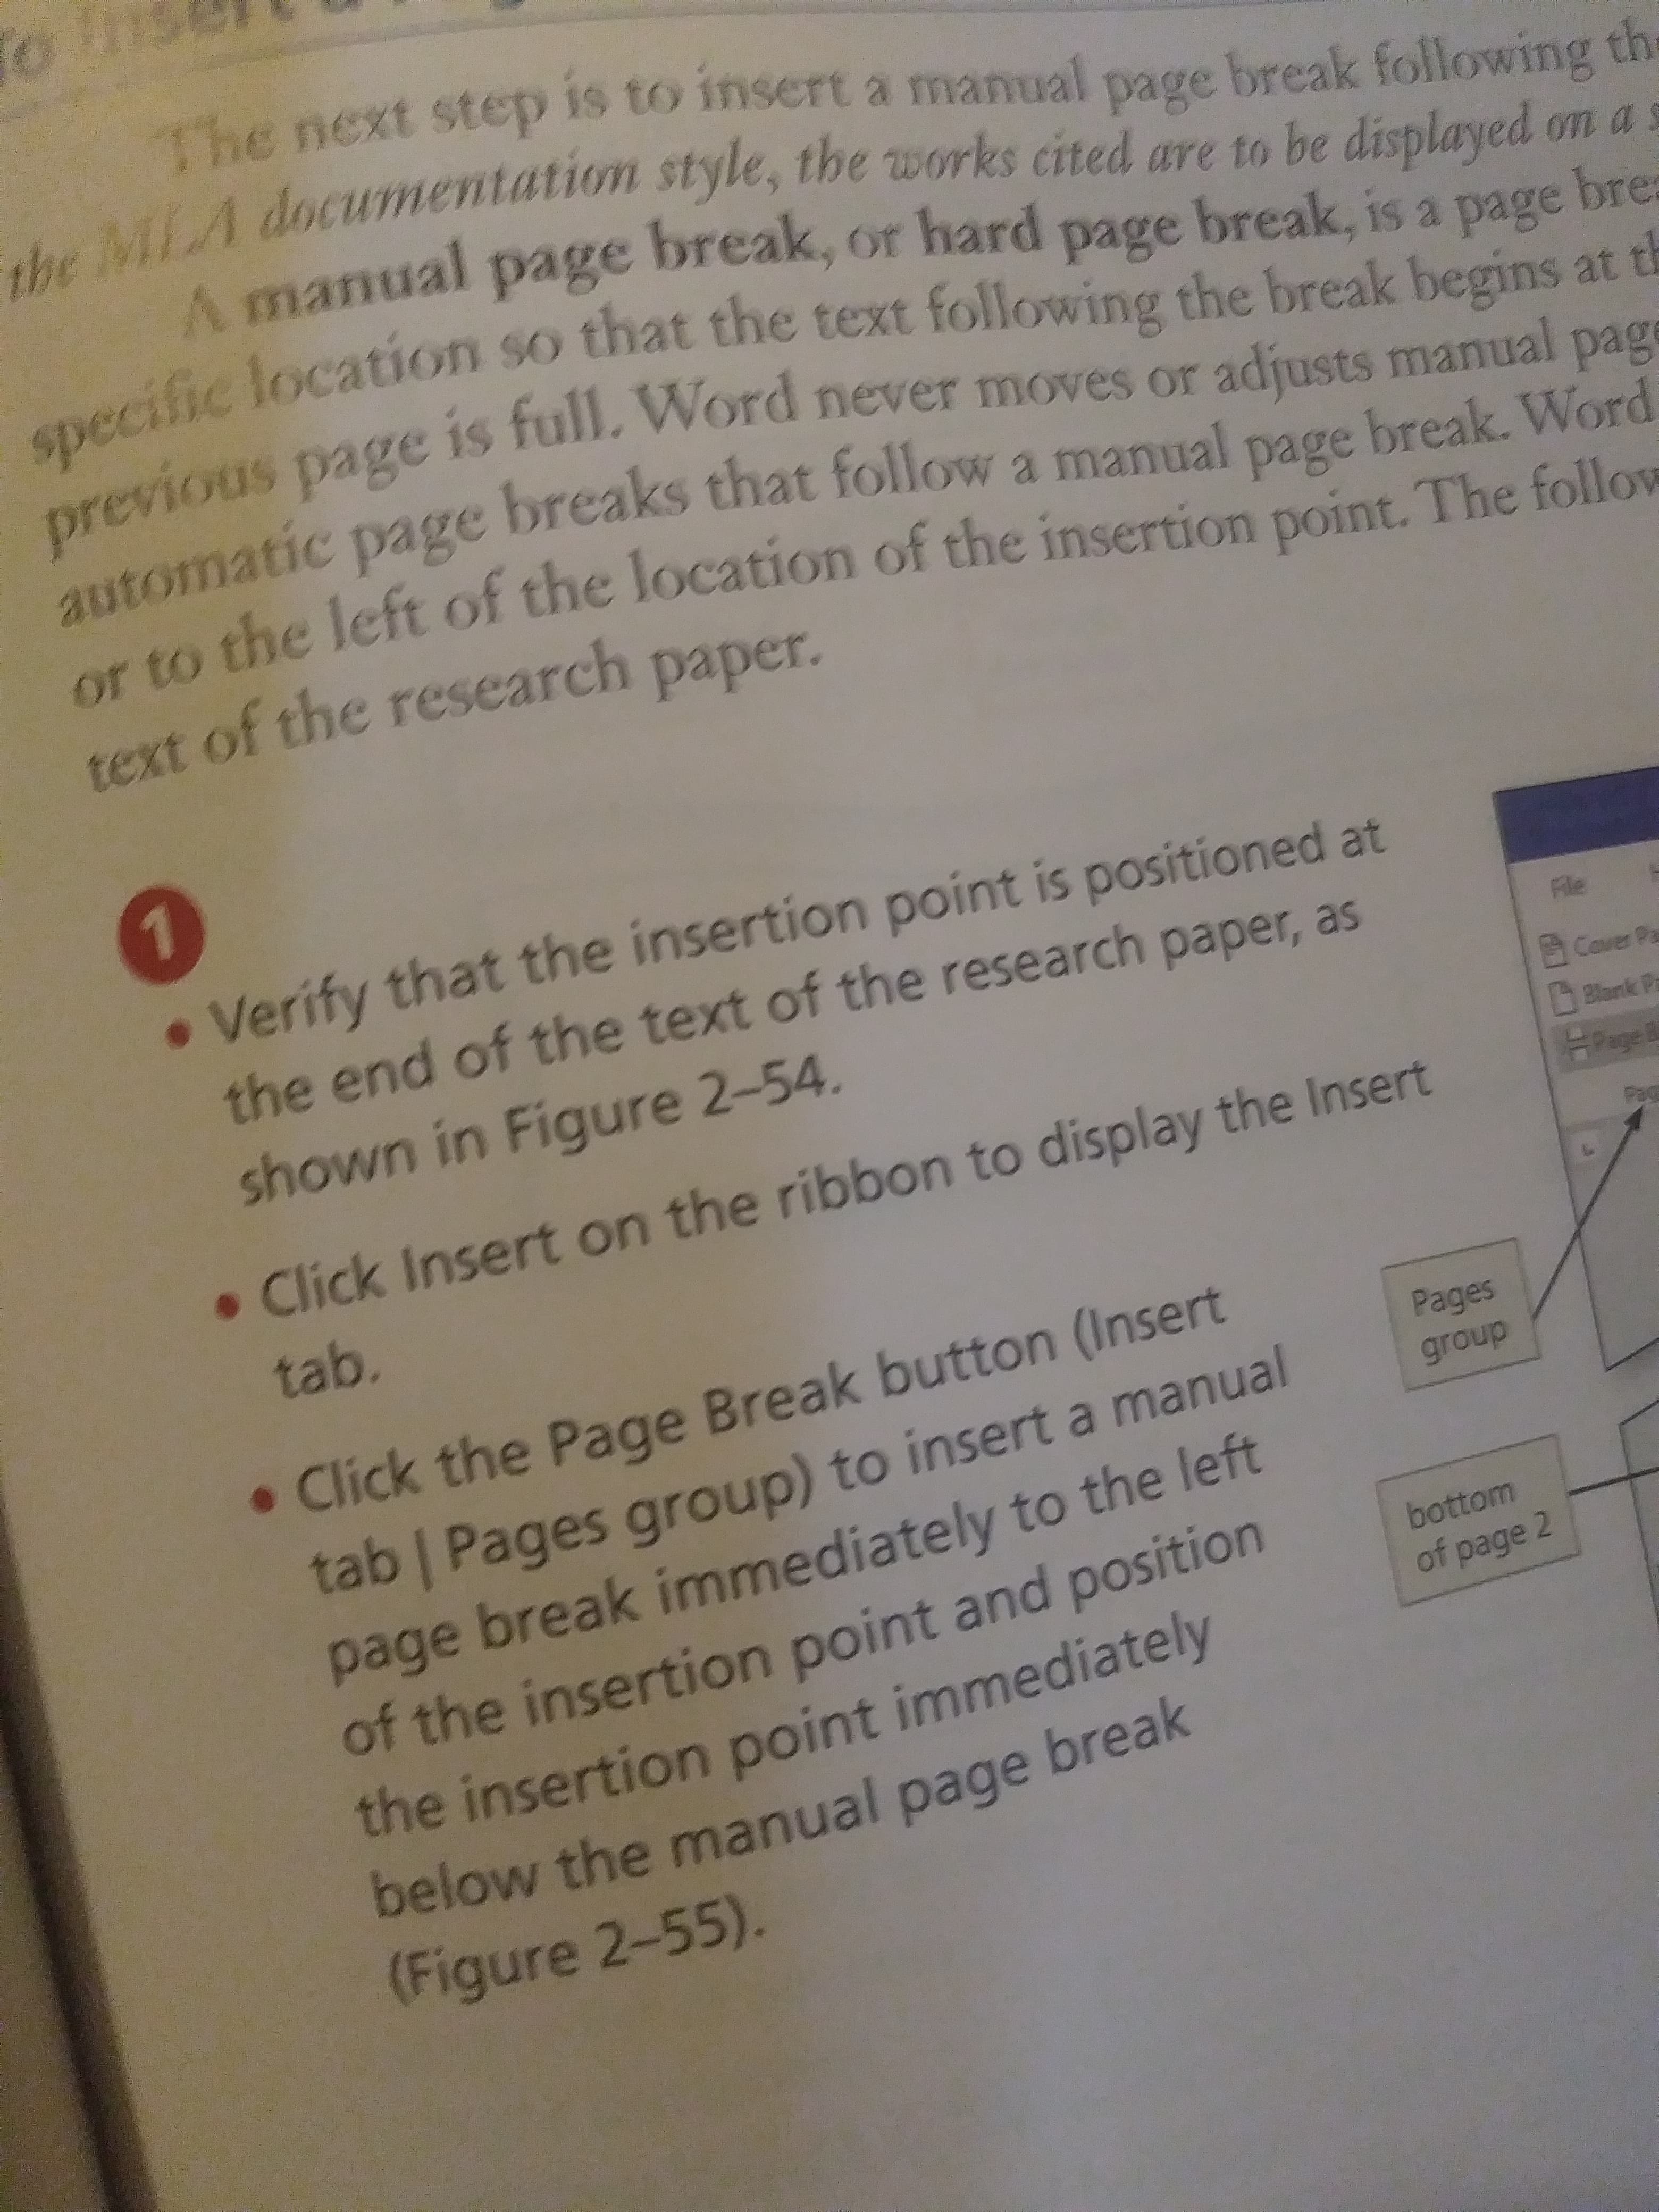 The next step is to insert a manual
break following the
the MLA documentation style, the works cited are to be displayed on a s
page
A manual page break, or hard page break, is a page bre=
specific location so that the text following the break begins at t
previous page is full. Word never moves or adjusts manual pag
e
automatic page breaks that follow a manual page break. Word
or to the left of the location of the insertion point. The follow
page
text of the research paper.
. Verify that the insertion point is positioned at
the end of the text of the research paper, as
Fle
Caver Pa
shown in Figure 2-54.
Blark Pa
HPageA
• Click Insert on the ribbon to display the Insert
tab.
• Click the Page Break button (Insert
Pages
tab | Pages group) to insert a manual
page break immediately to the left
of the insertion point and position
the insertion point immediately
below the manual page break
(Figure 2-55).
group
bottom
of page 2
